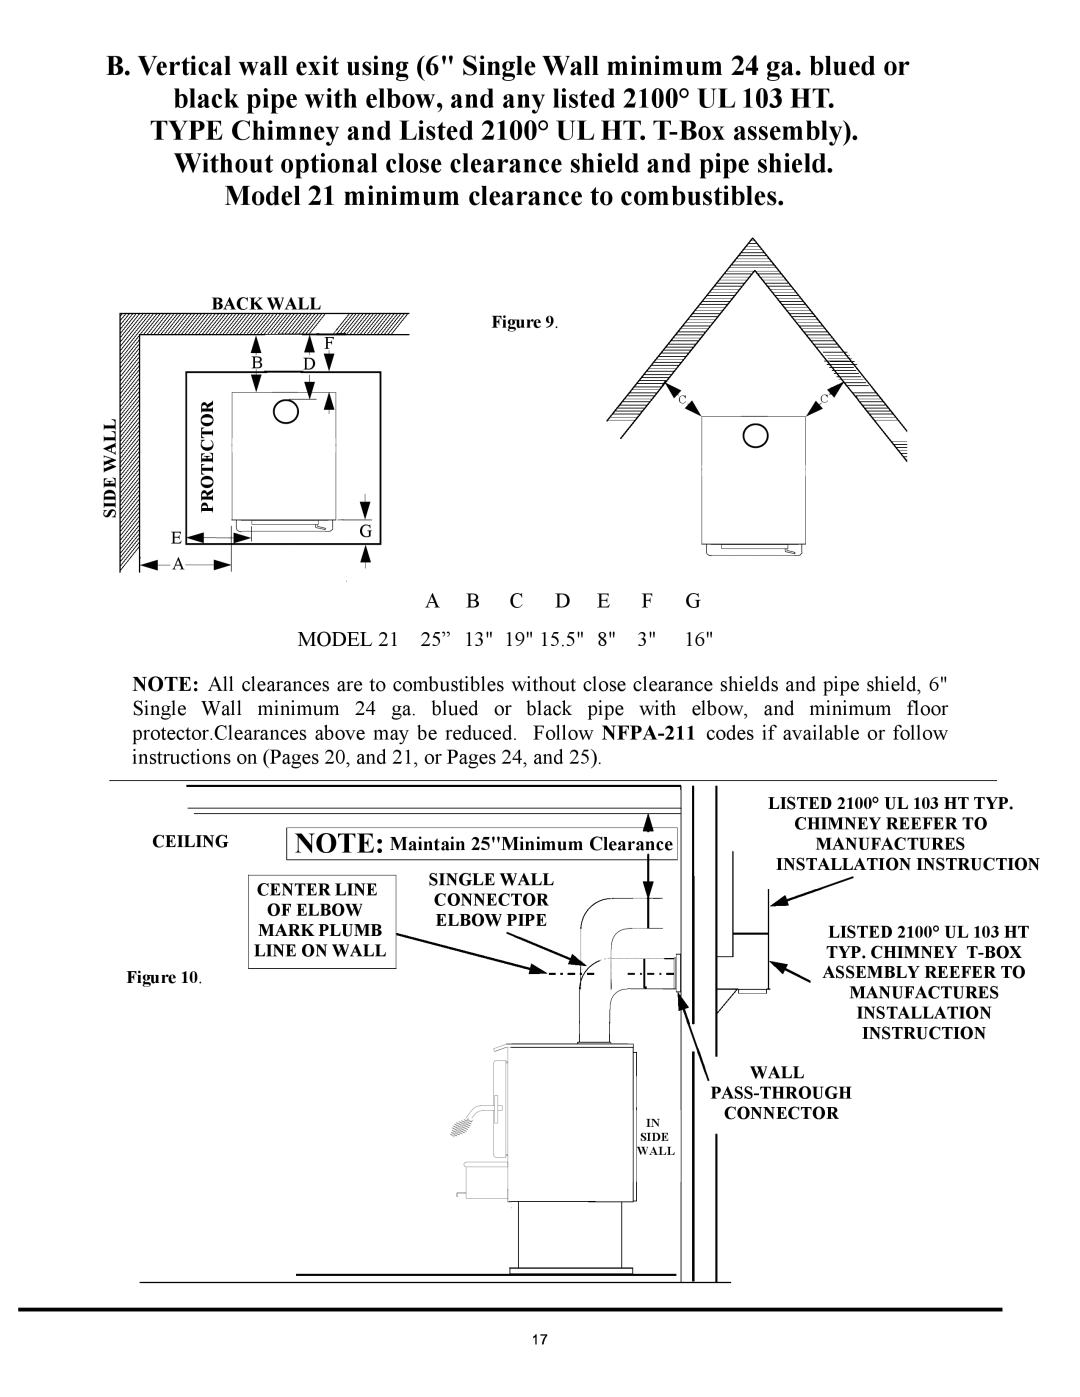 New Buck Corporation installation instructions Model 21 minimum clearance to combustibles 